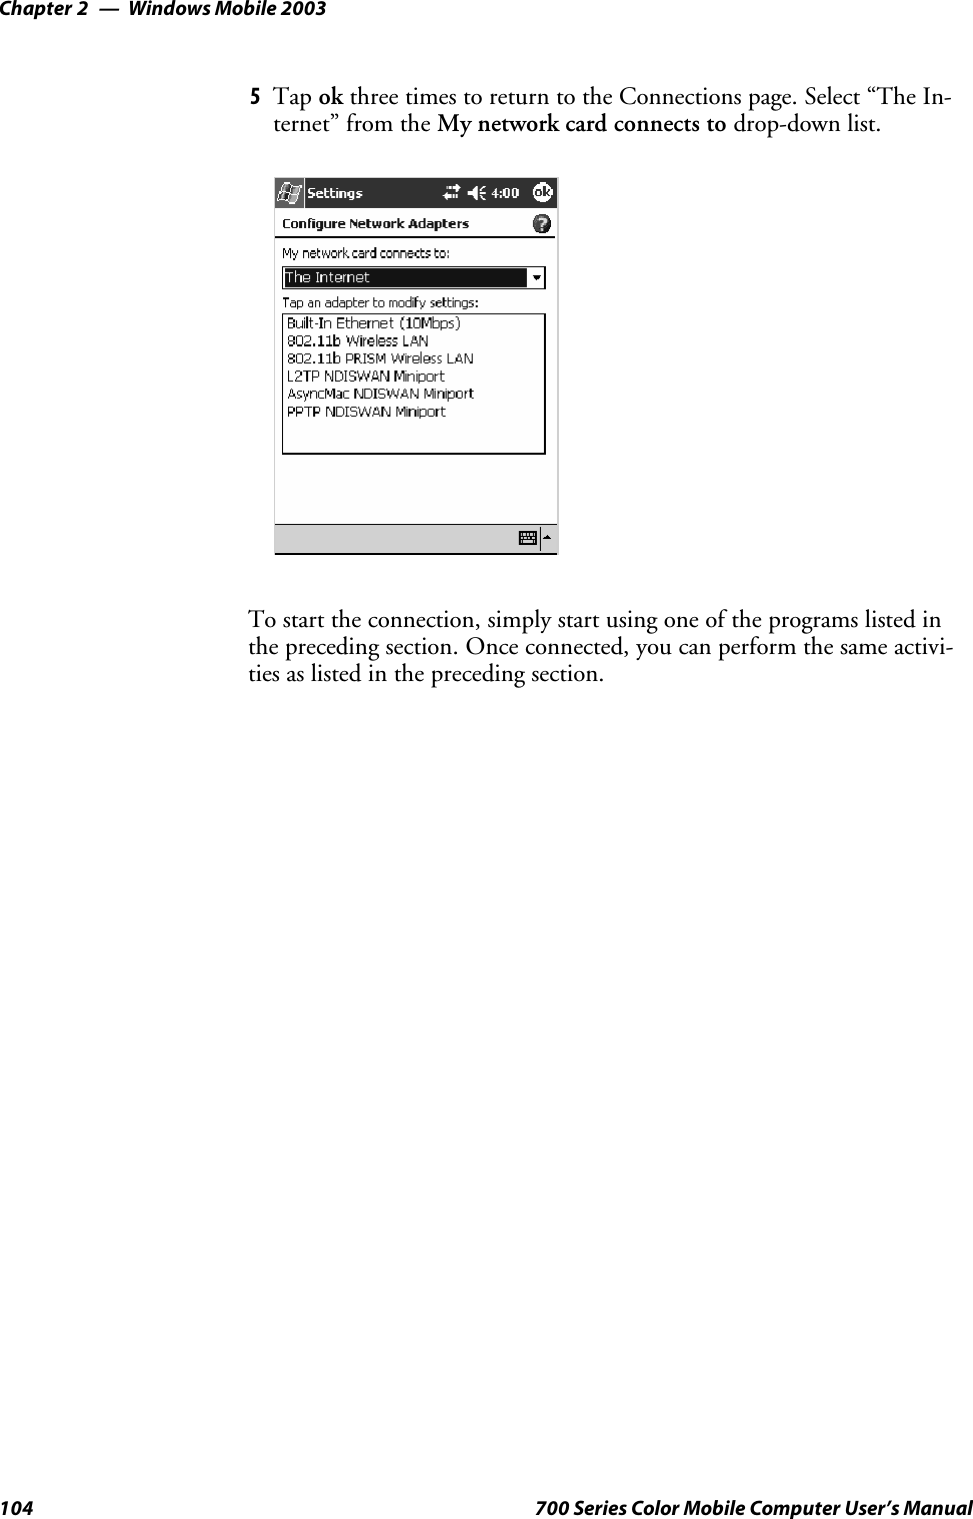 Windows Mobile 2003Chapter —2104 700 Series Color Mobile Computer User’s Manual5Tap ok three times to return to the Connections page. Select “The In-ternet” from the My network card connects to drop-down list.To start the connection, simply start using one of the programs listed inthe preceding section. Once connected, you can perform the same activi-ties as listed in the preceding section.